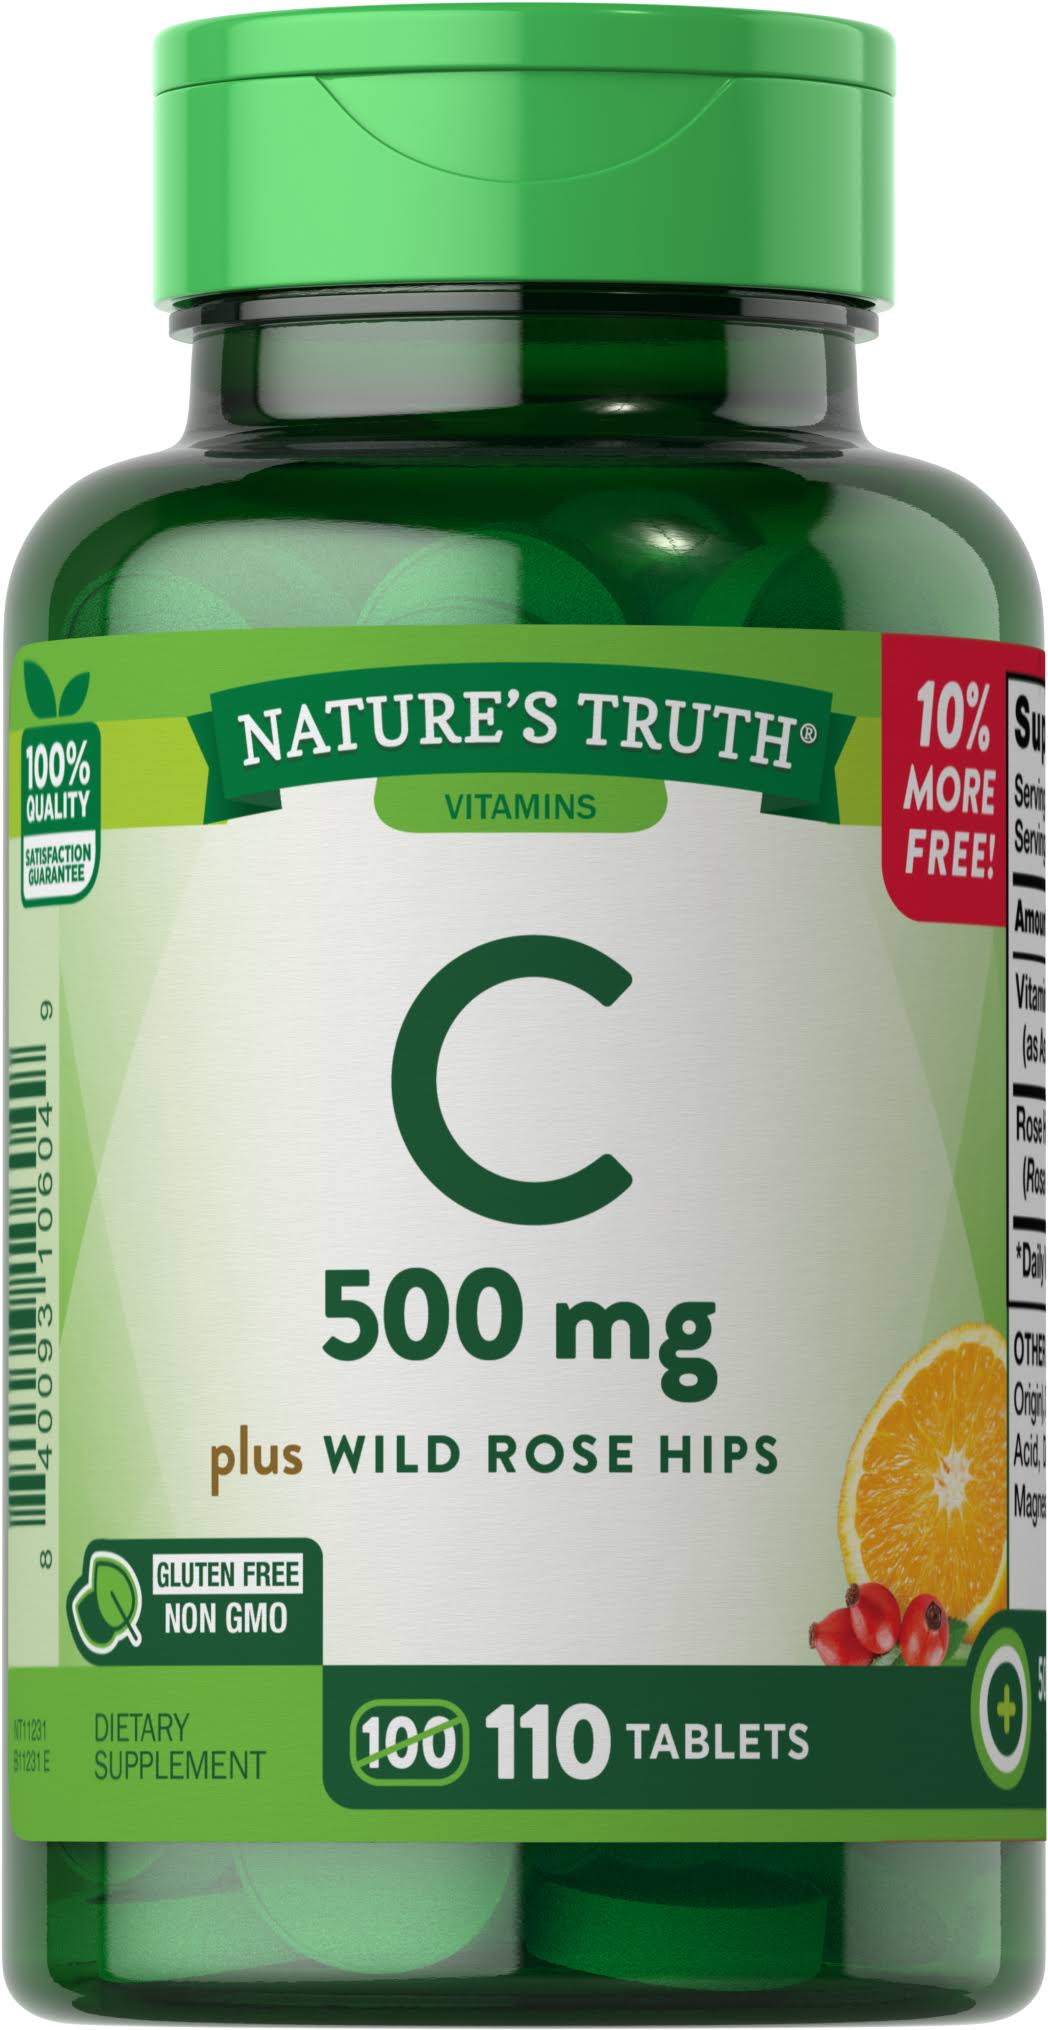 Nature's Truth Vitamin C Plus Wild Rose Hips 500 MG 110 Tablets